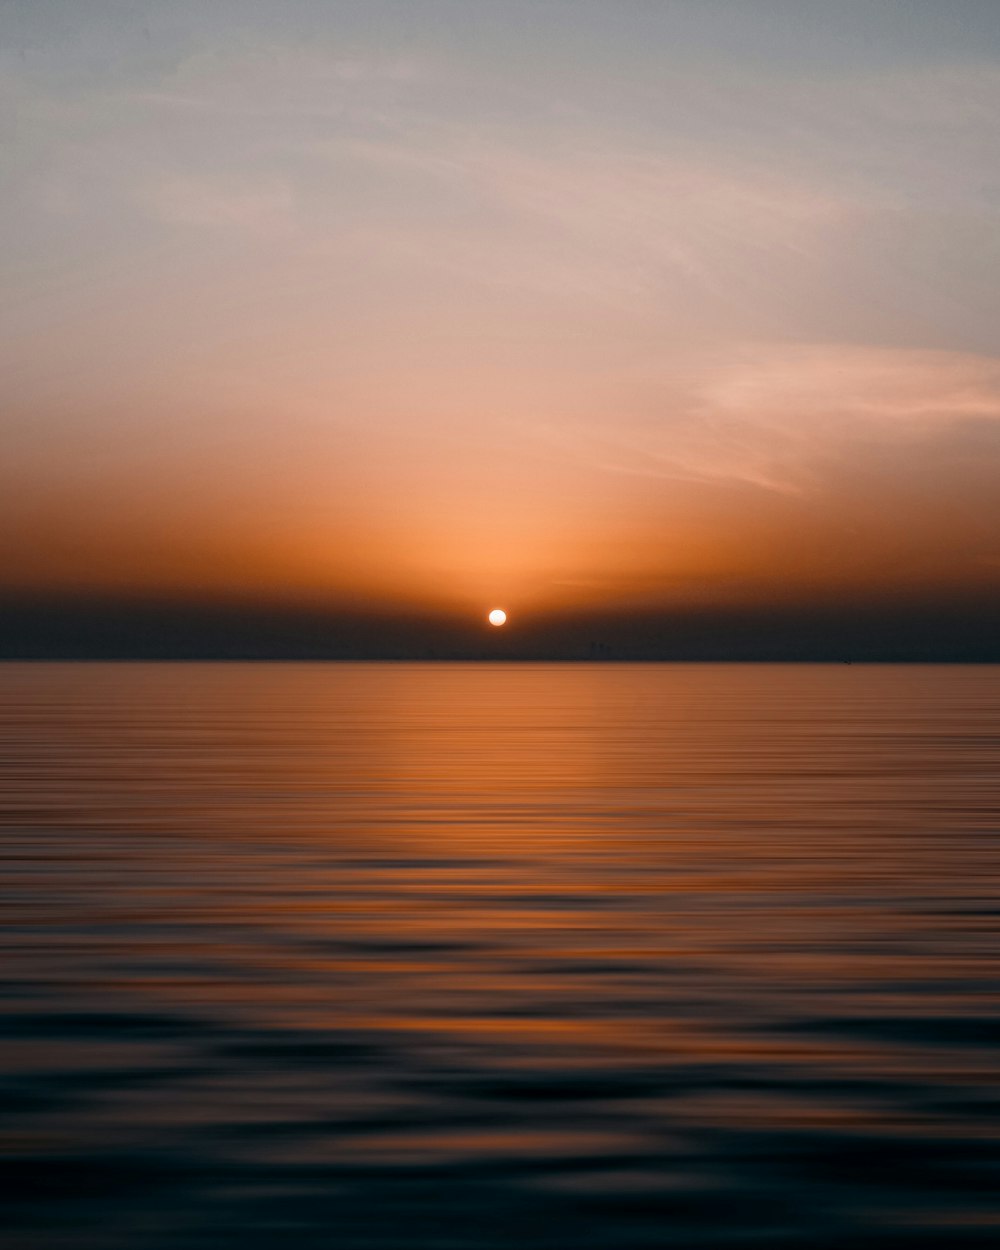 the sun is setting over the water in the ocean